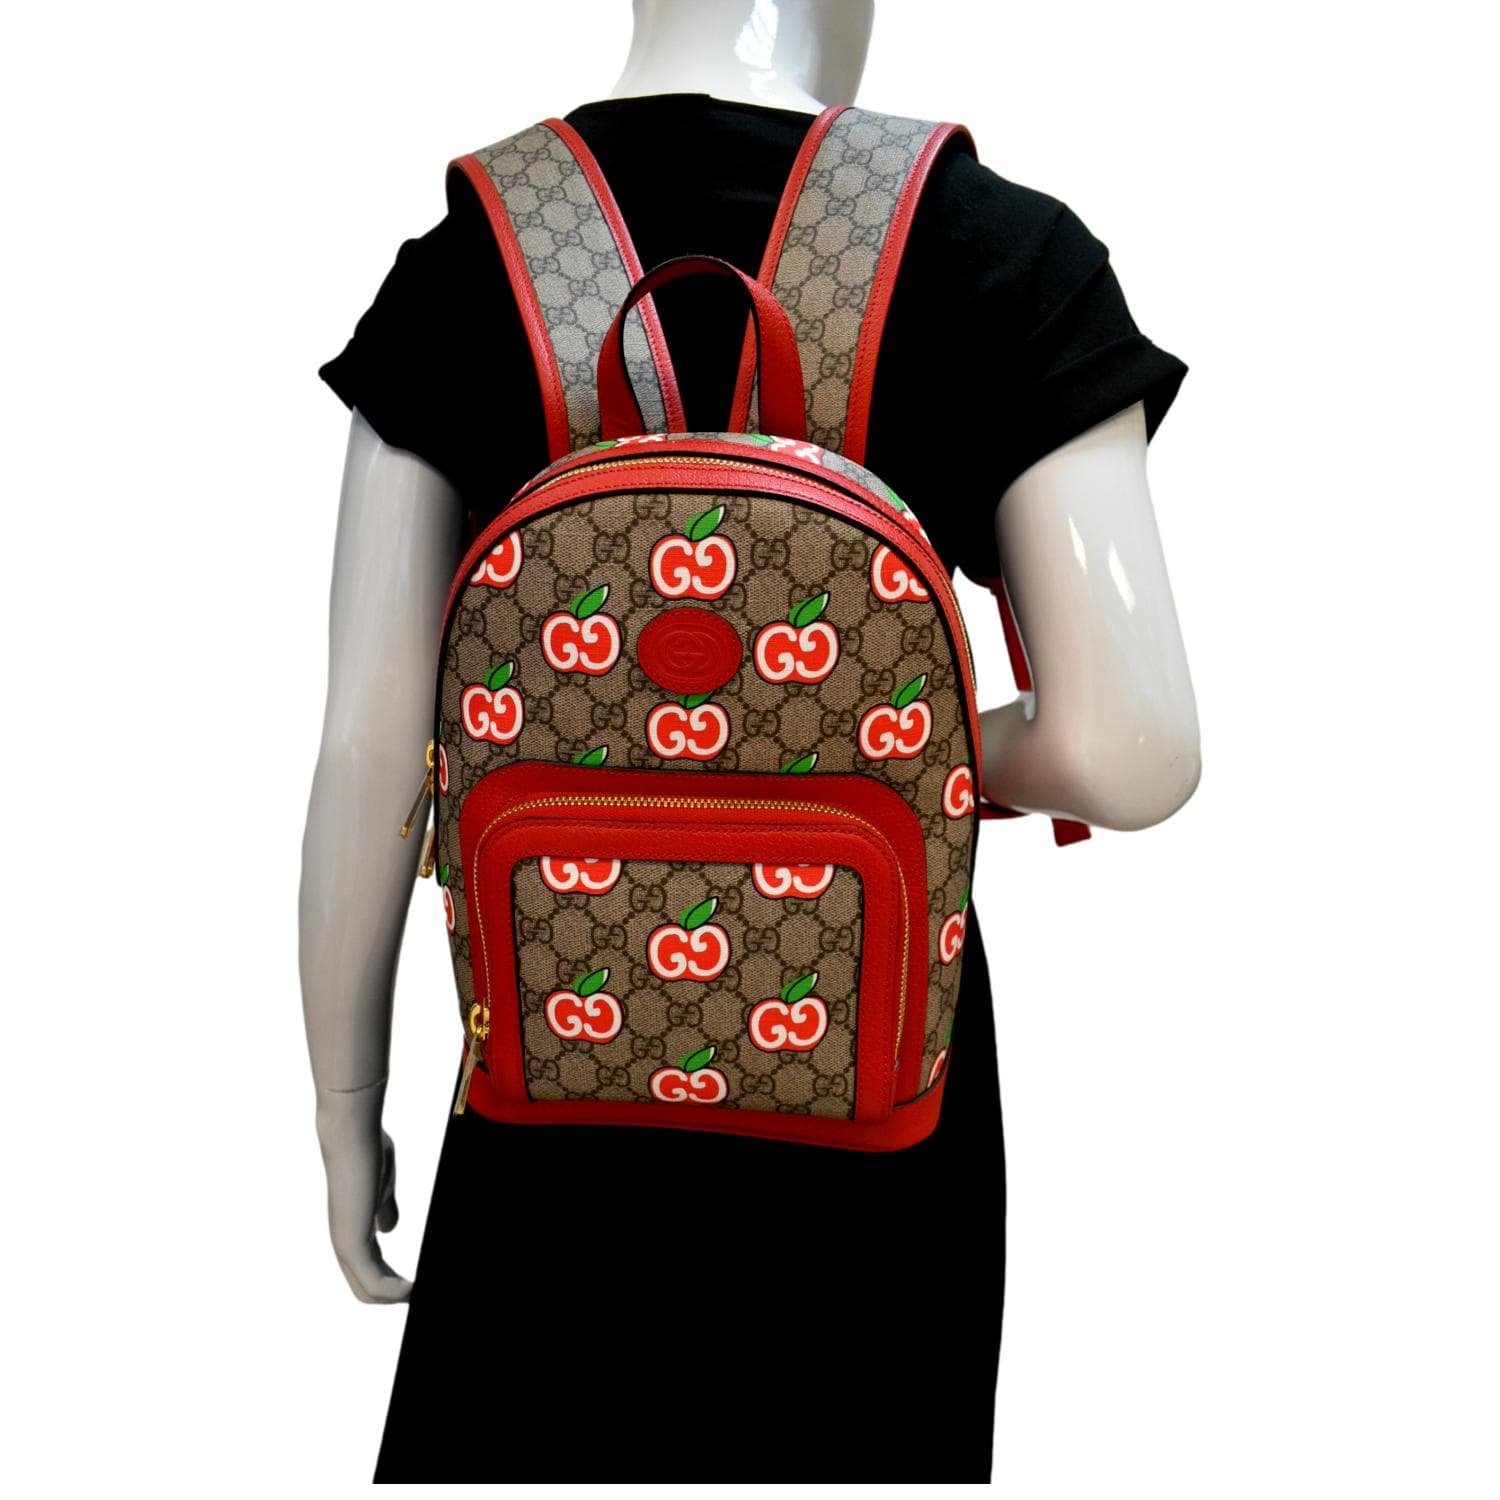 Gucci Backpacks for Women, Authenticity Guaranteed